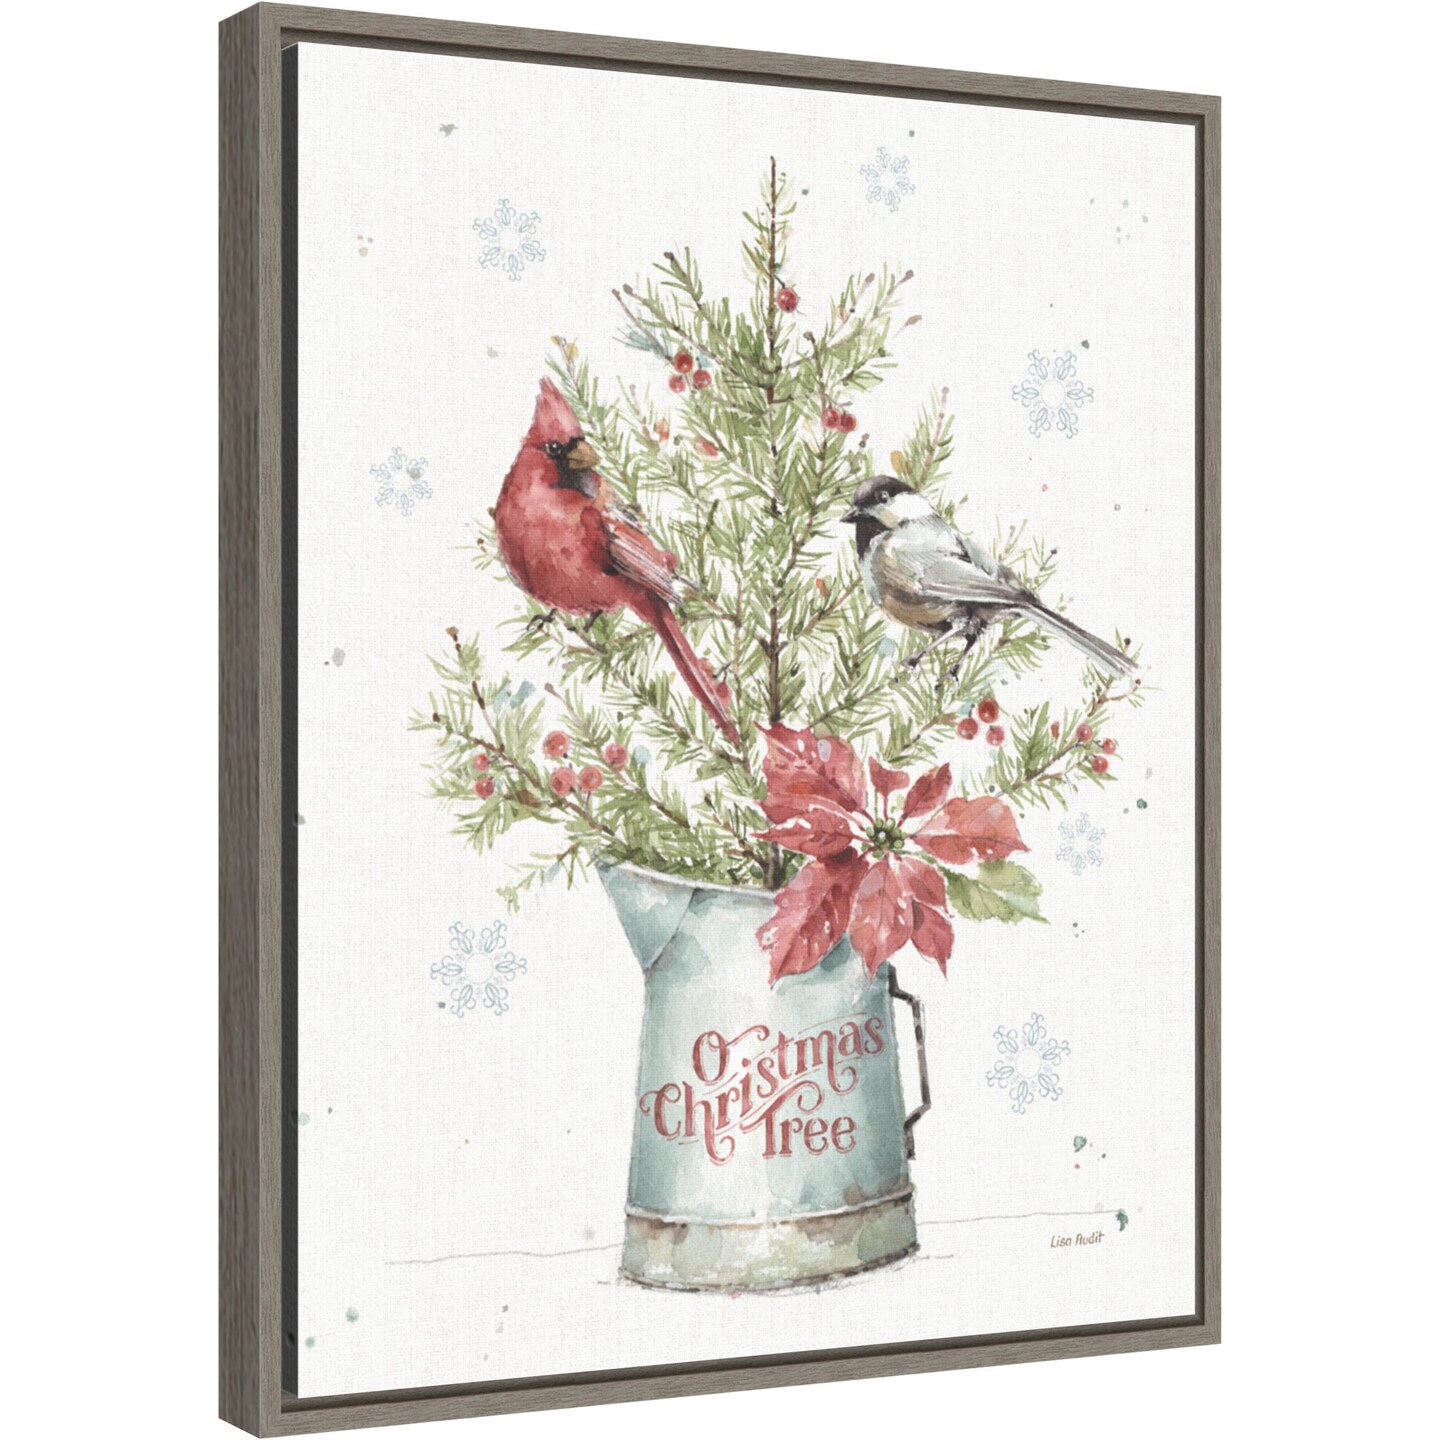 A Christmas Weekend II with Chickadee by Lisa Audit 16-in. W x 20-in. H. Canvas Wall Art Print Framed in Grey